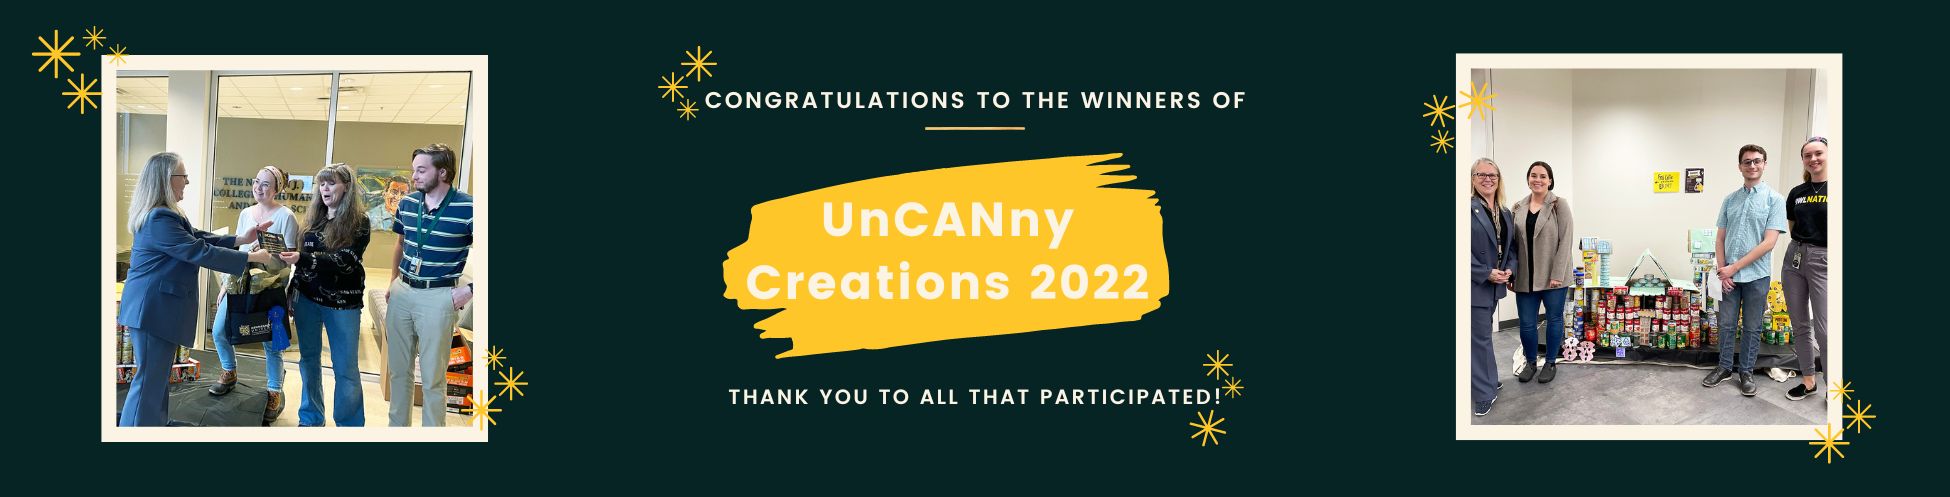 Congratulations to the UnCANny Creations Winners!